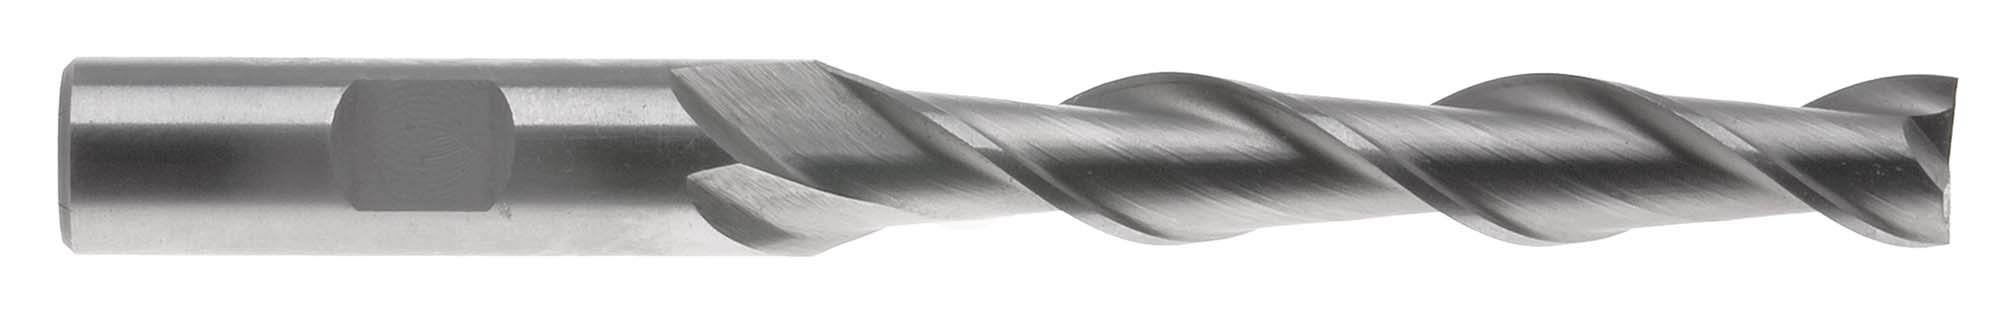 EM-AL12B  3/8"  Extra Long Aluminum Cutting 2 Flute End Mill with High Helix Flutes, 3/8" shank, High Speed Steel